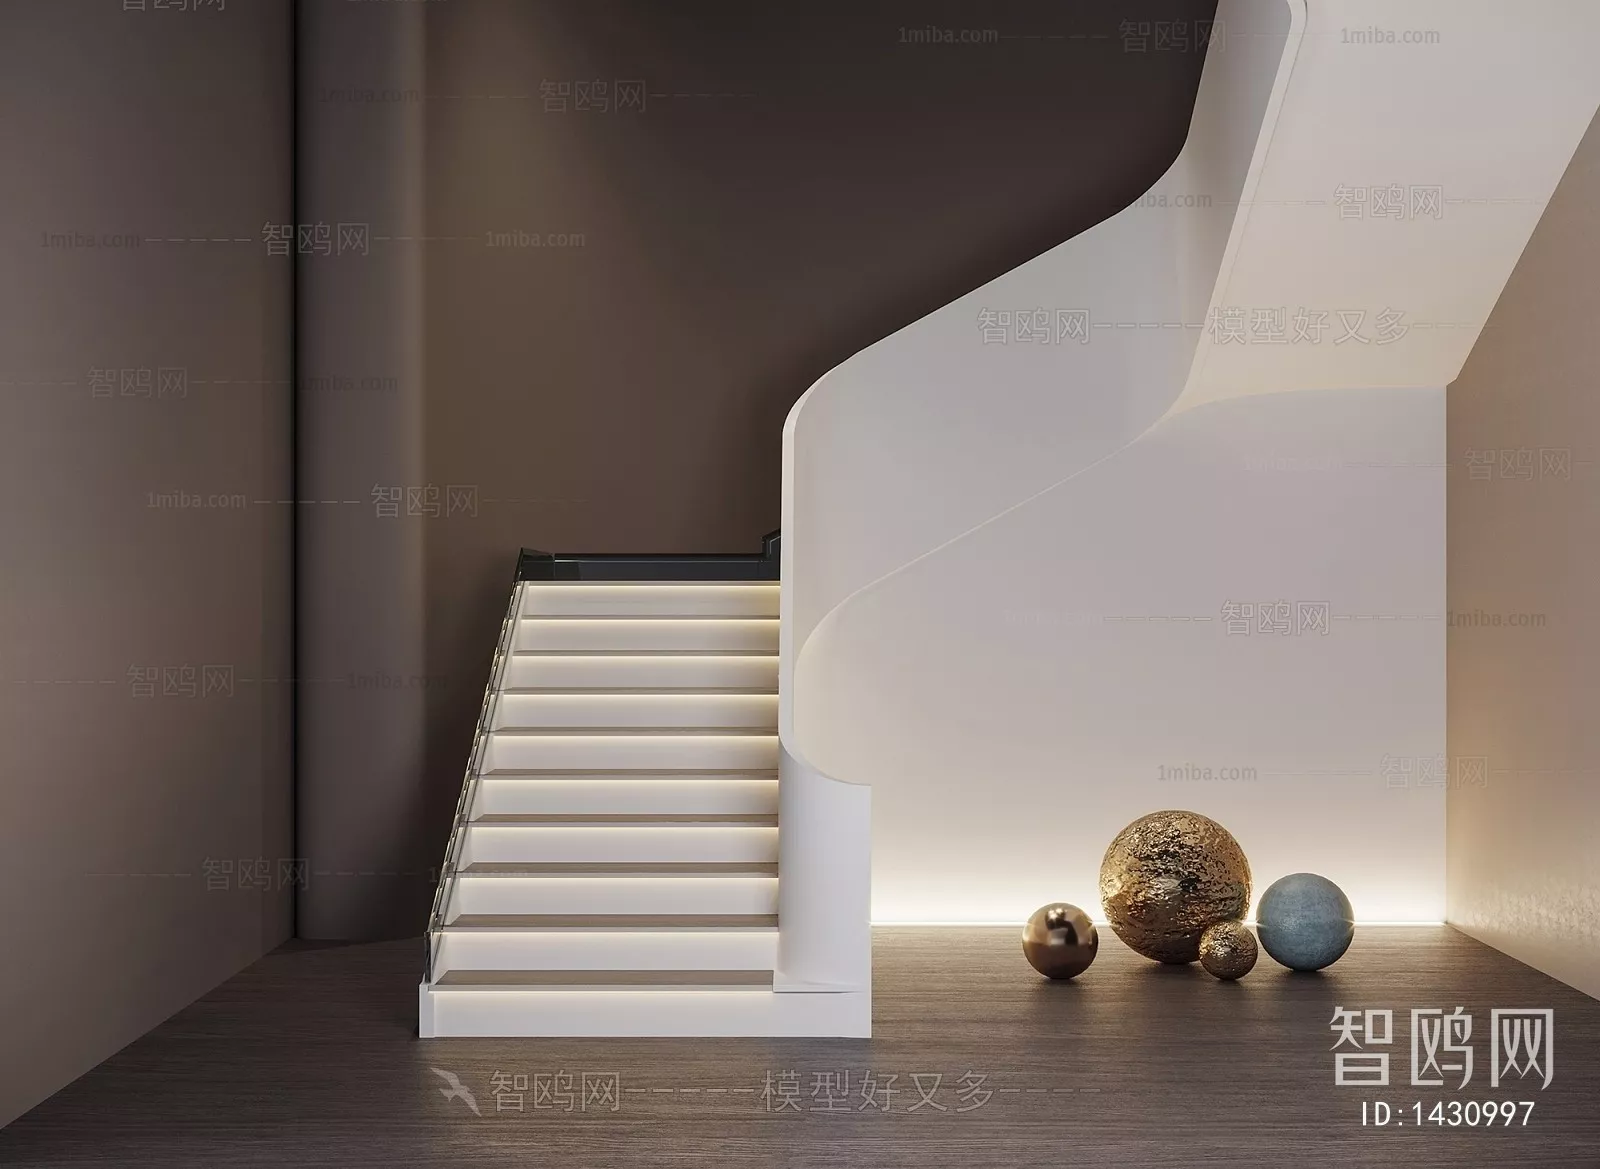 MODERN STAIR - SKETCHUP 3D MODEL - VRAY OR ENSCAPE - ID14319